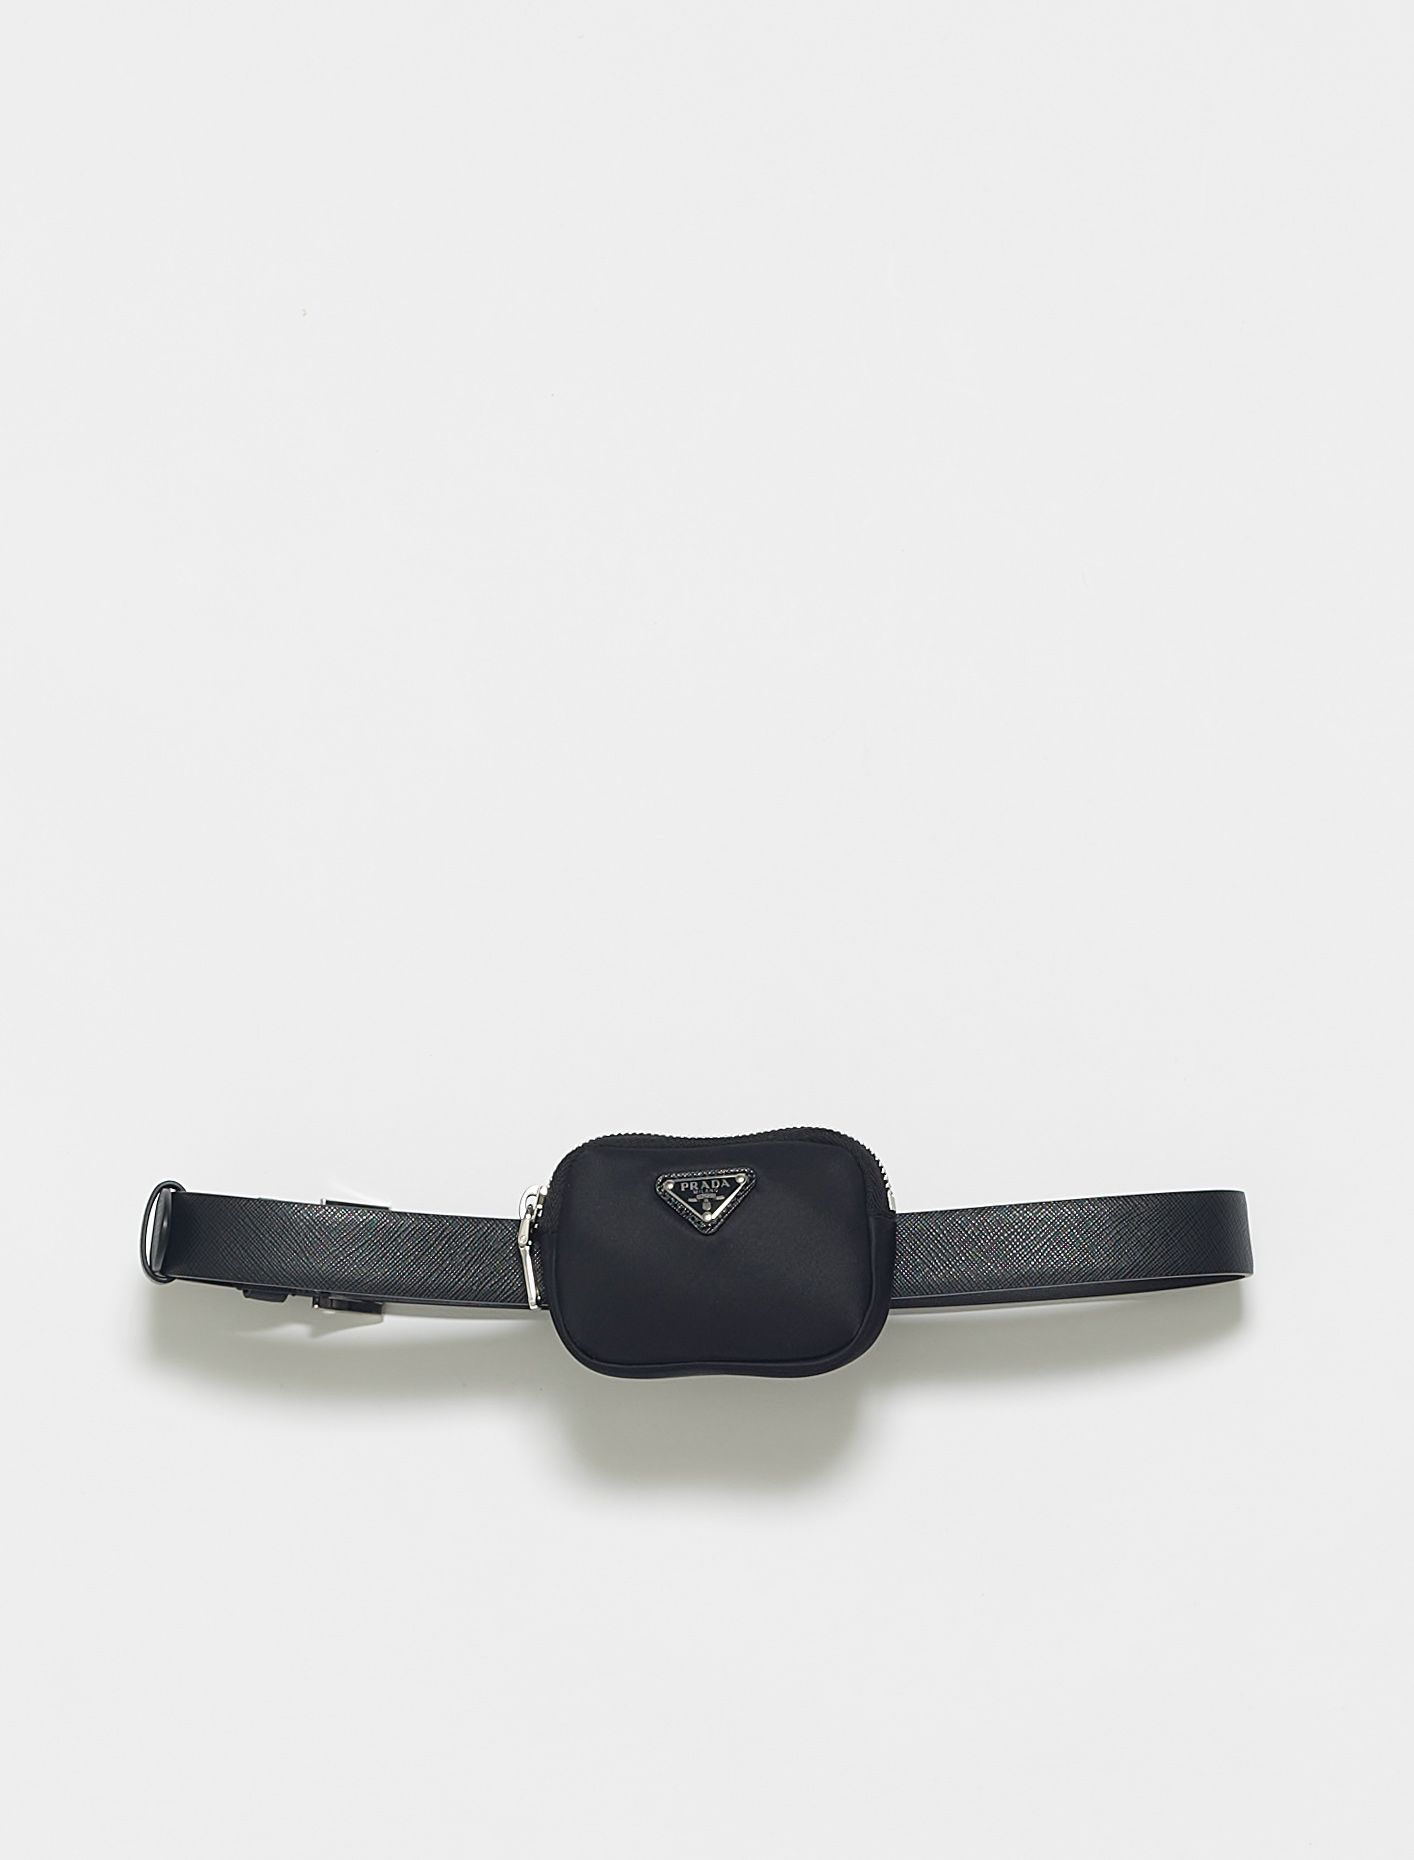 Prada Saffiano Leather Belt with Pouch in Black | Voo Store Berlin ...